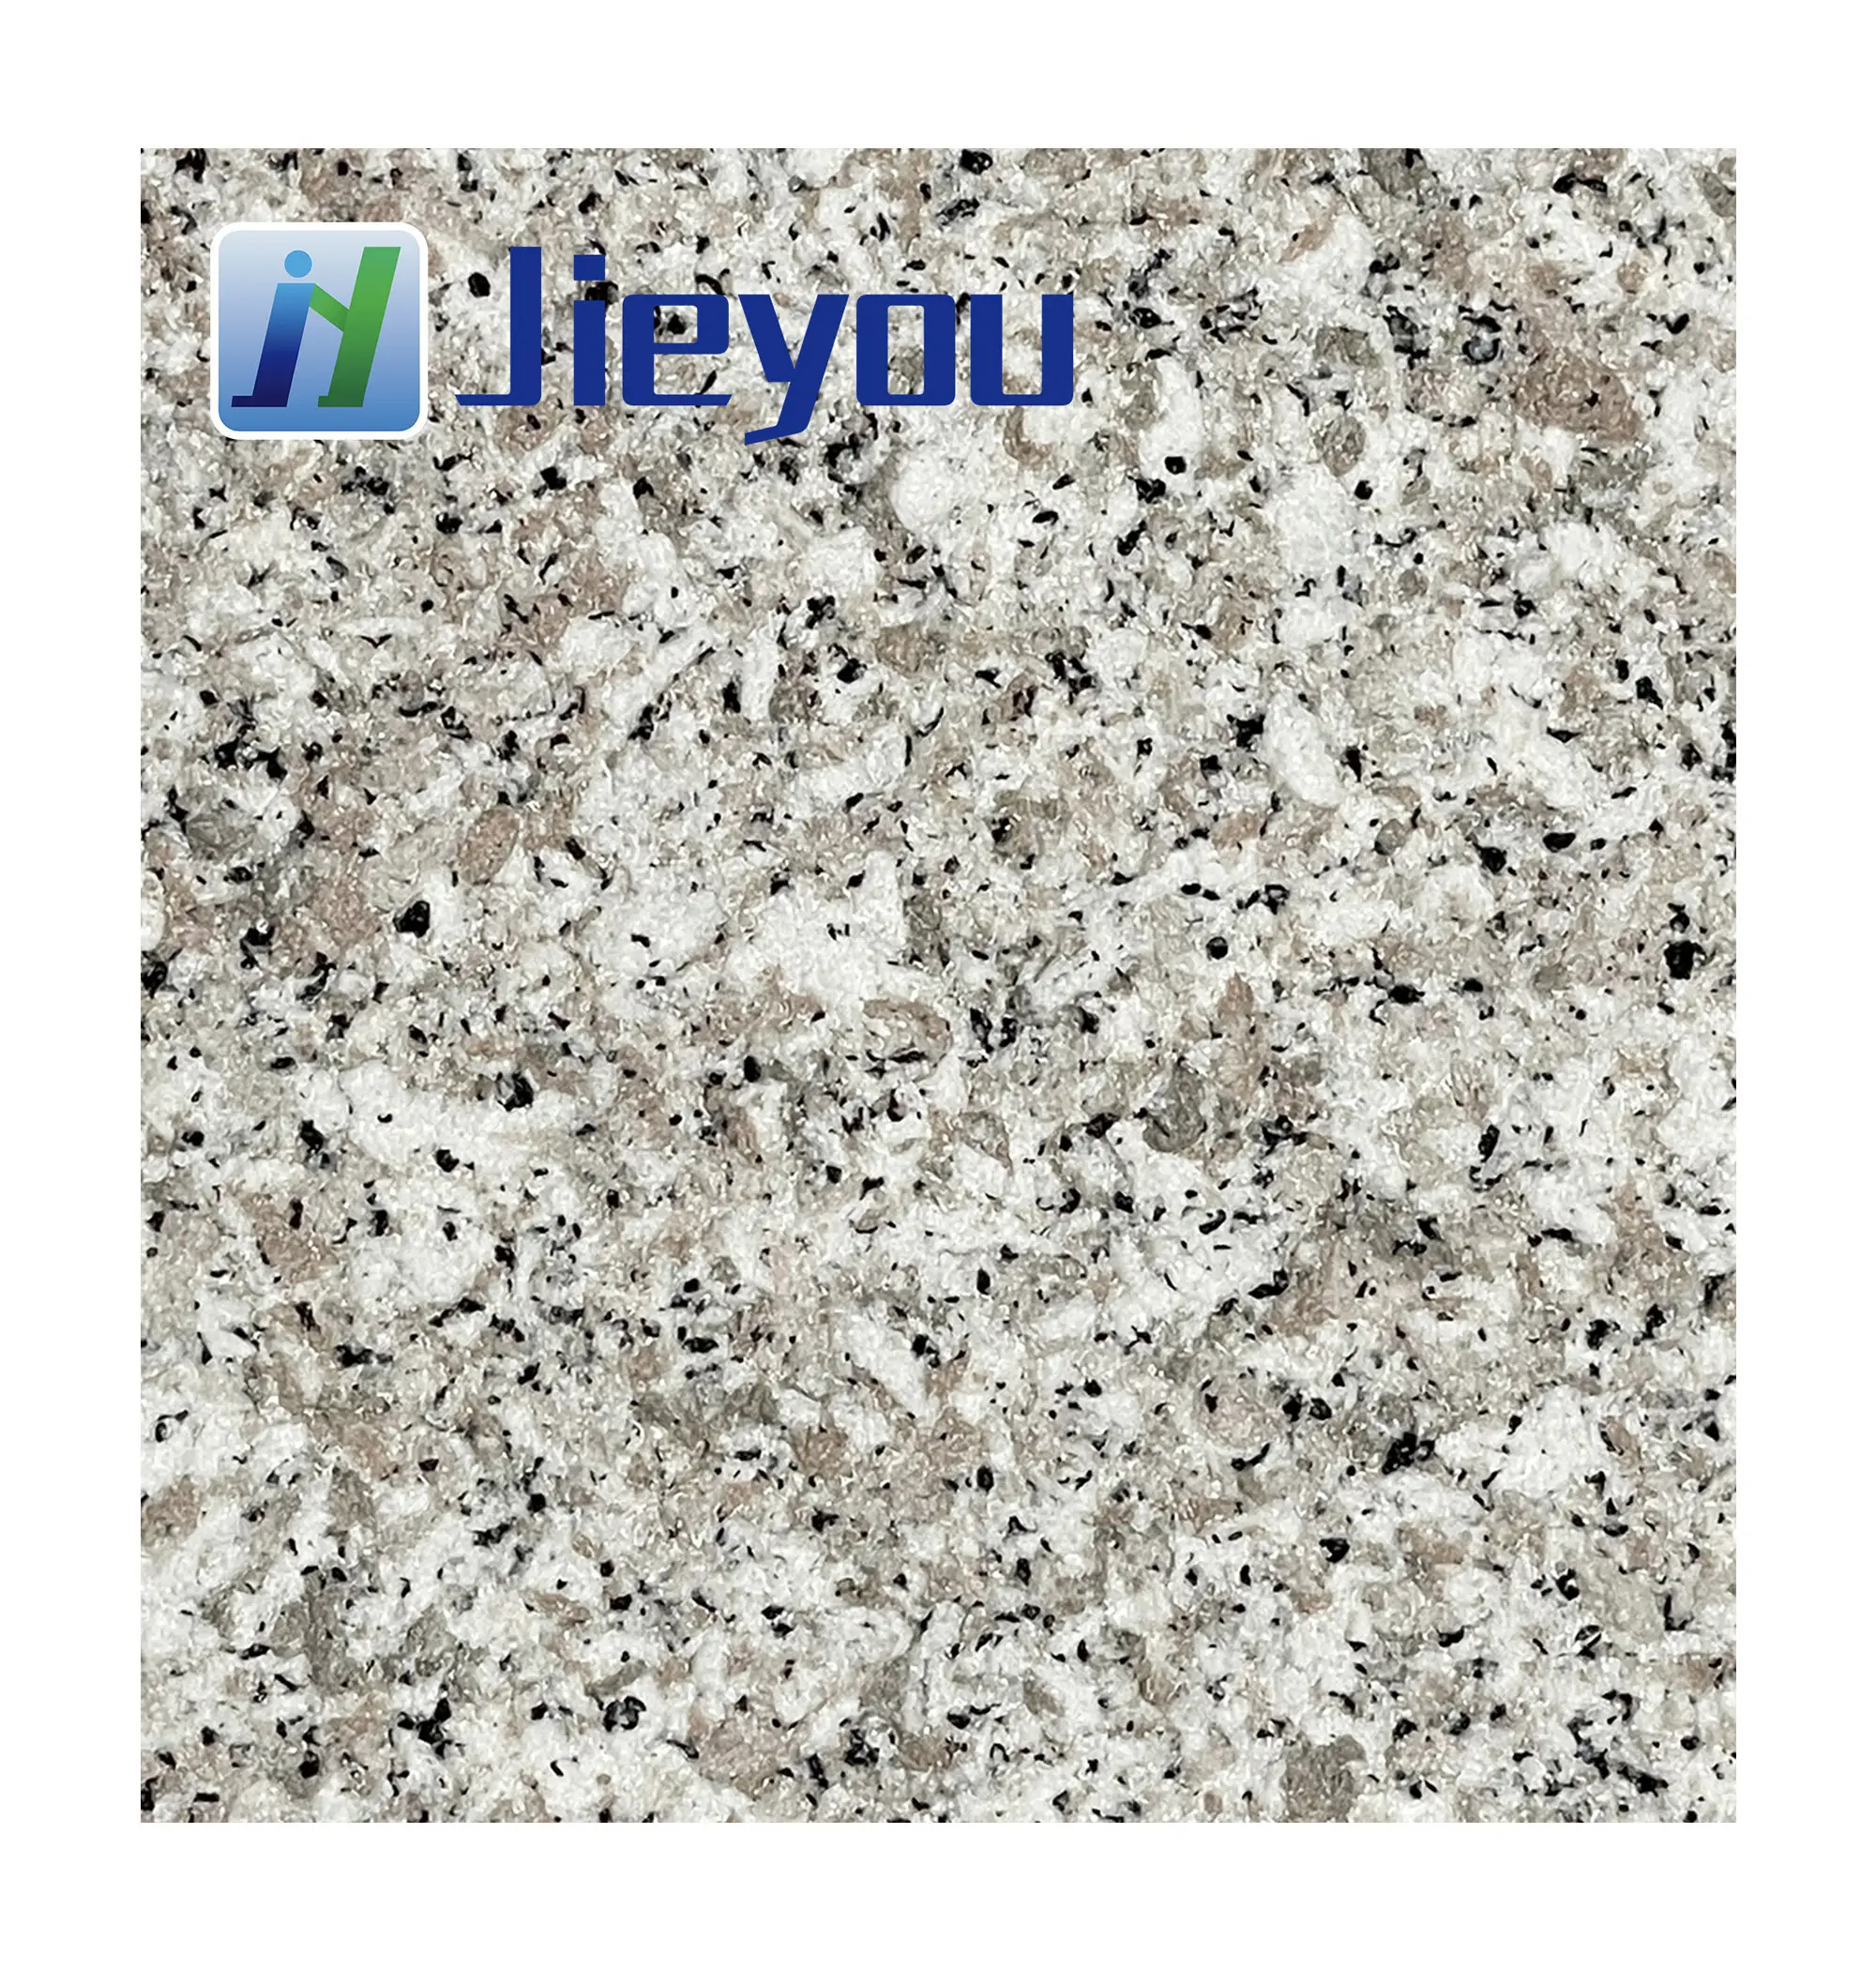 Weather-Resistant Liquid Paint with Granite Texture for Exterior Wall Stone and Building Marble Coating Applied with Brush